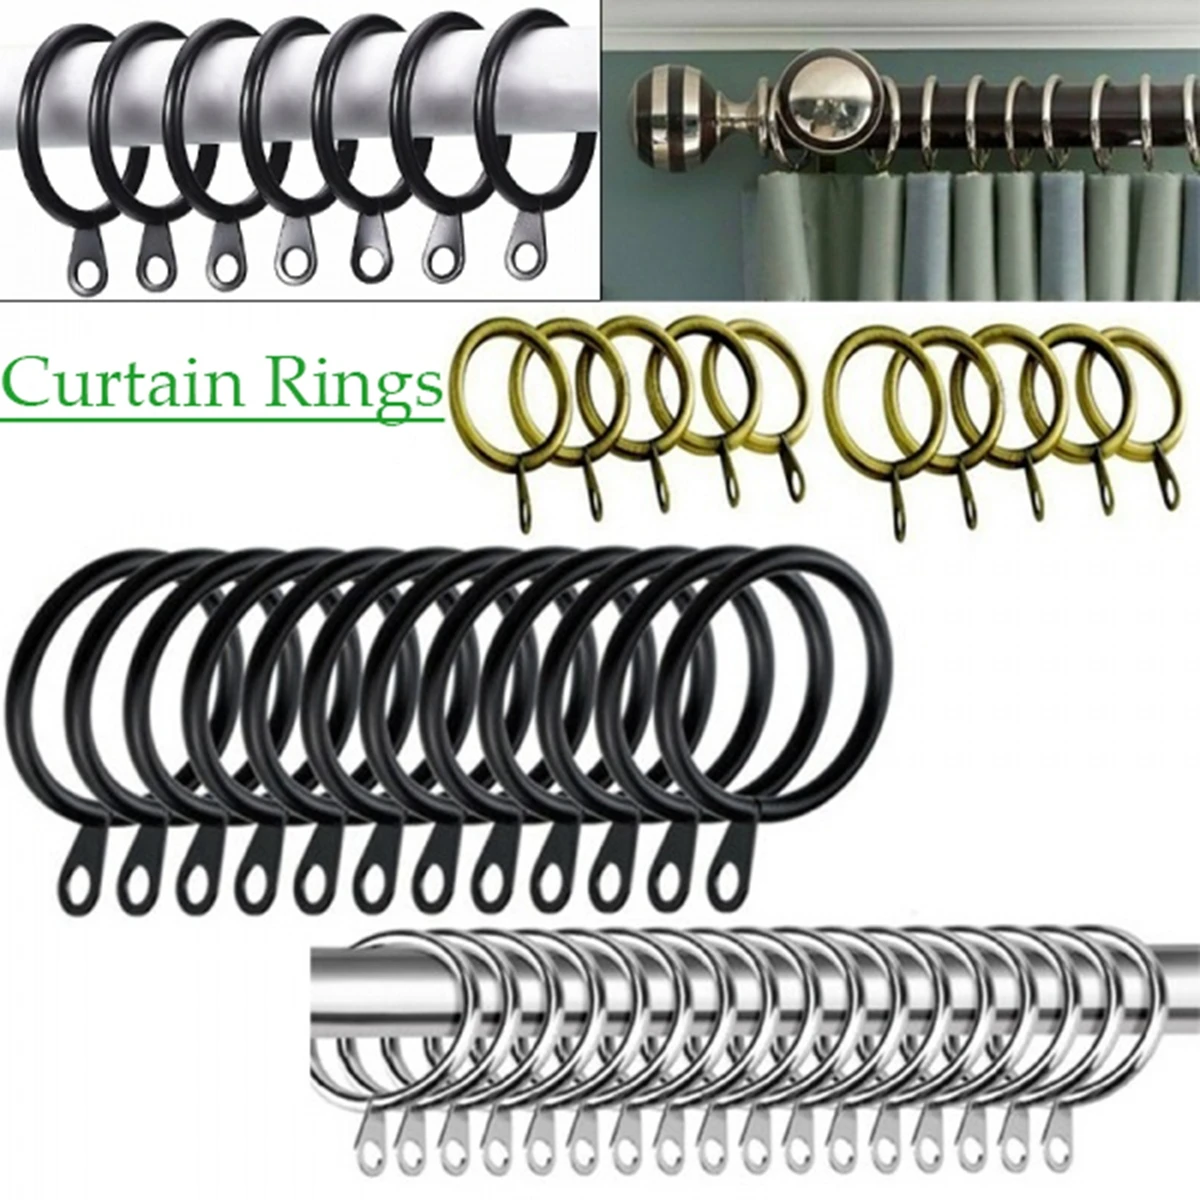 12pcs Curtain Clips Curtain Rod Rings Fits for Valance Drape Silver 